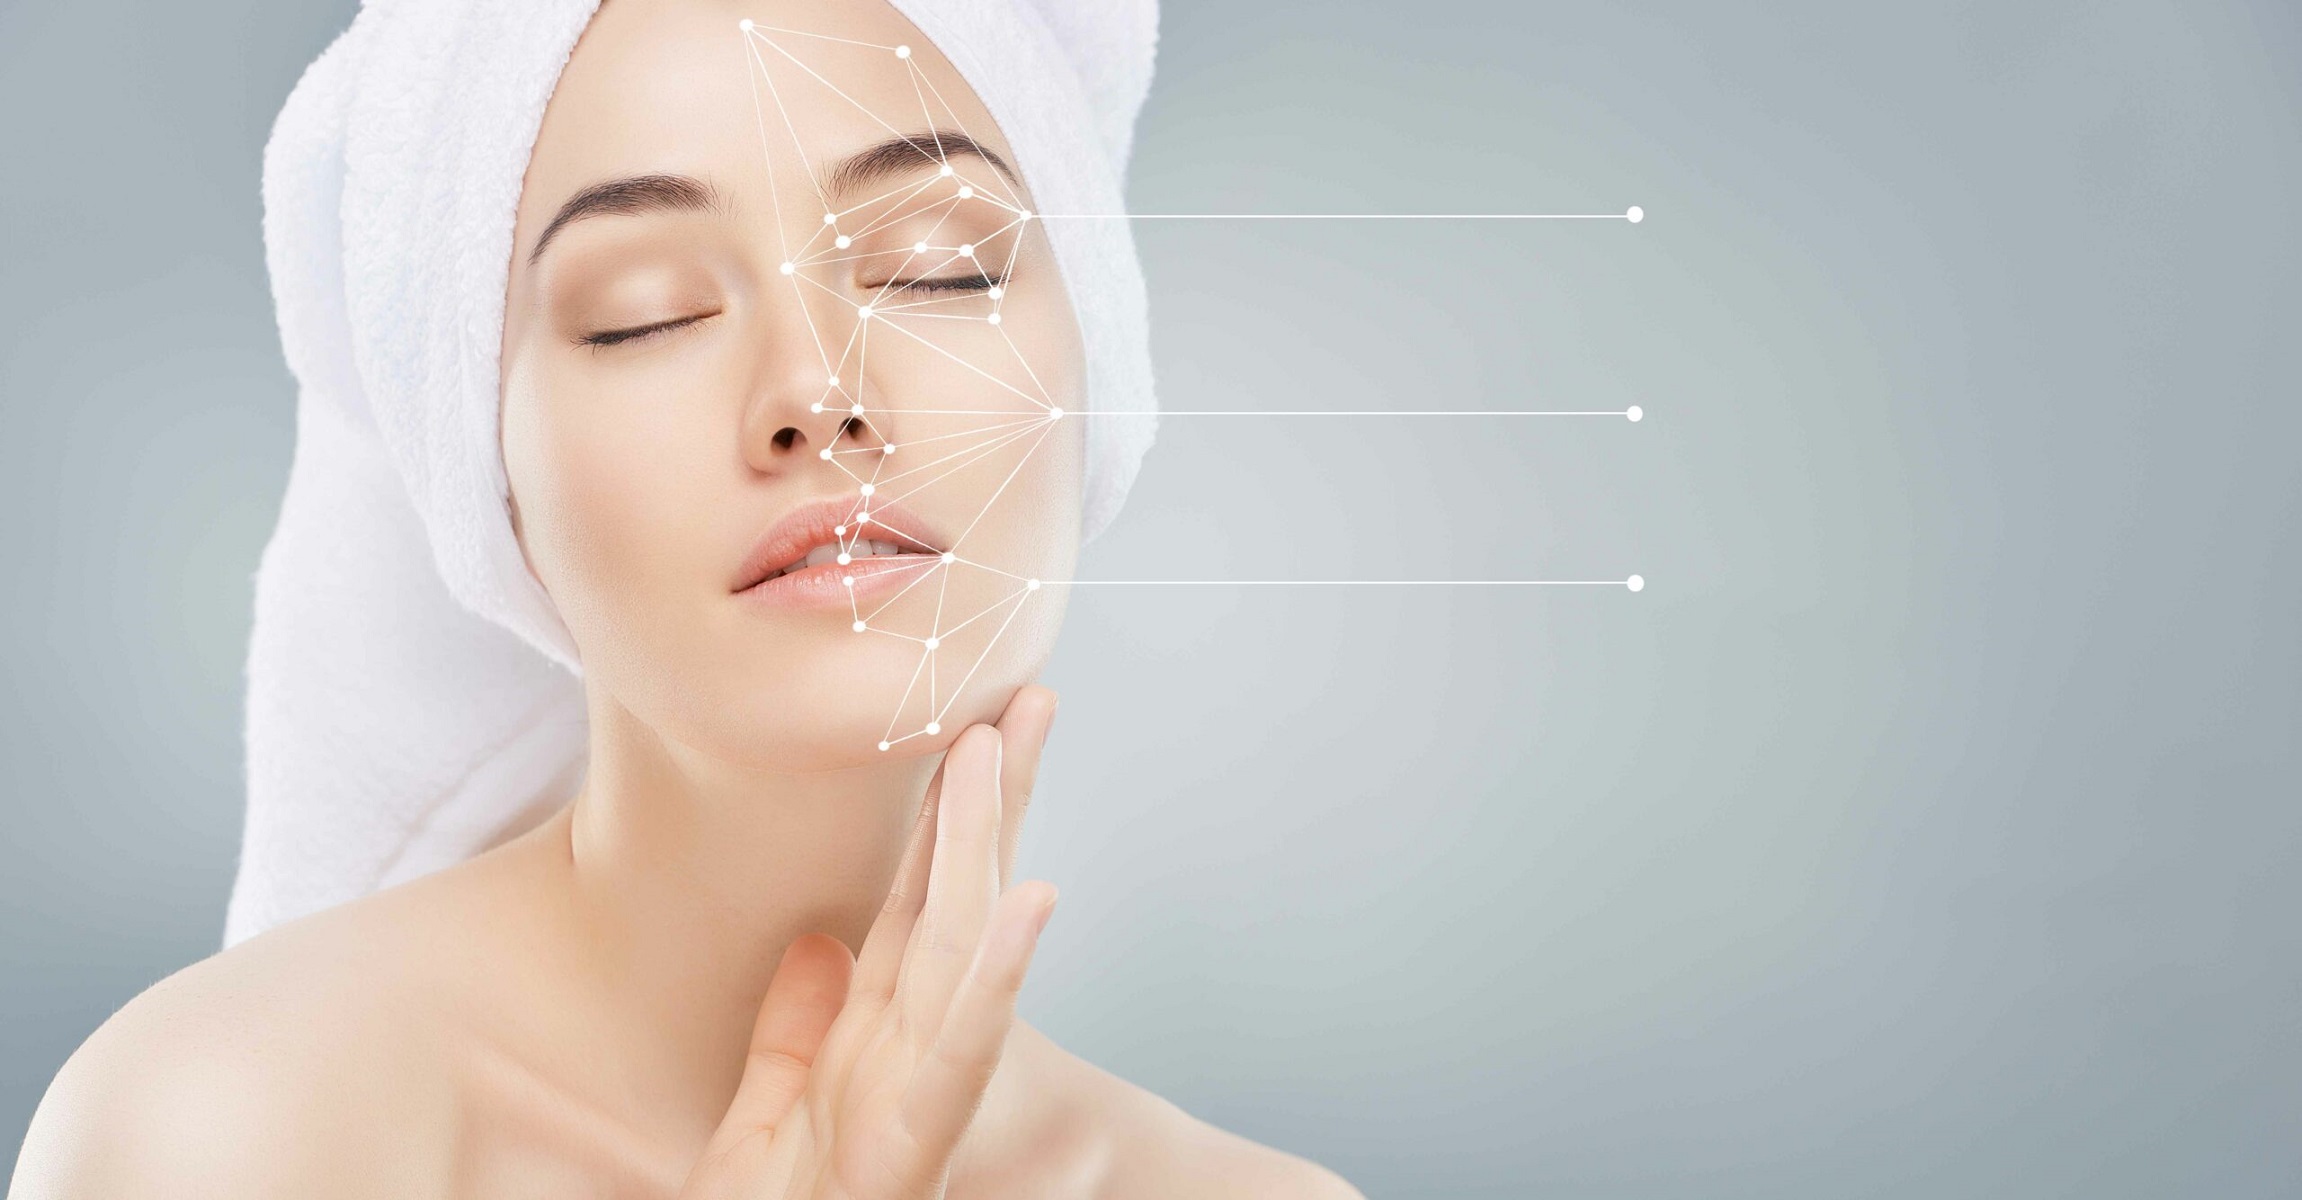 Young woman applying cosmetic cream | Soleill Medical & Beauty Spa in Portland, OR